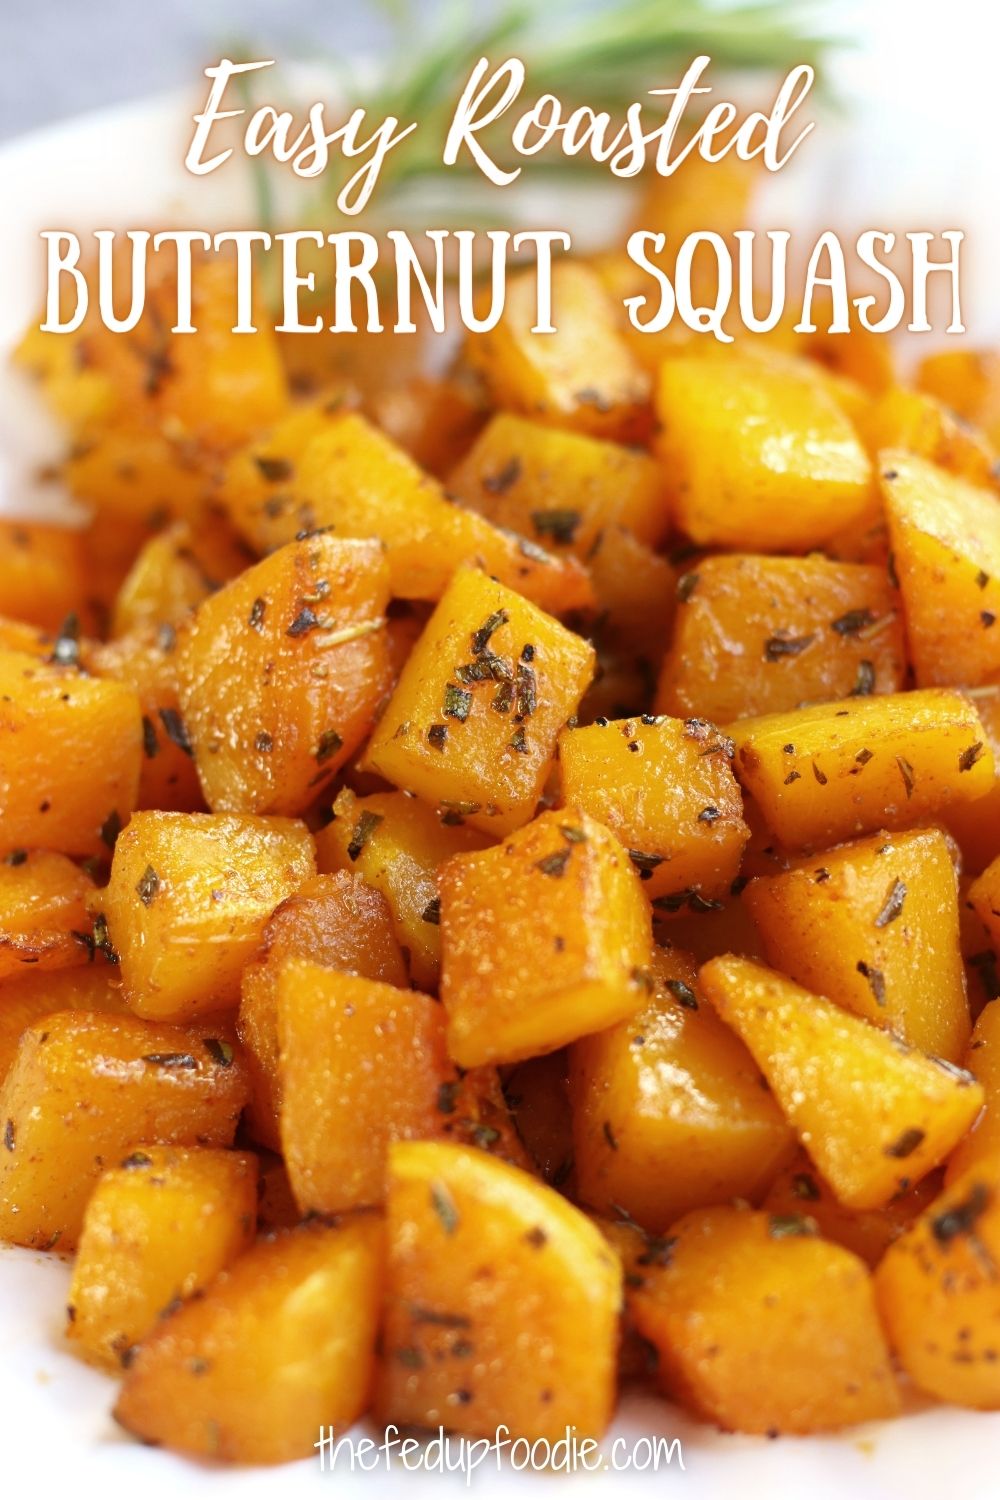 Roasted Butternut Squash with rosemary is a healthy, tasty and easy recipe that is special enough for holiday celebrations and yet simple enough for weekday dinners. Use this as a base for soups and salads or enjoy as a delicious side dish.
#RoastedButternutSquash #RoastedButternutSquashOven #RoastedButternut #BakedButternutSquashRecipes #ButternutSquashRecipesRoastedHealthy #BakingButternutSquashOven #HealthyButternutSquashRecipes